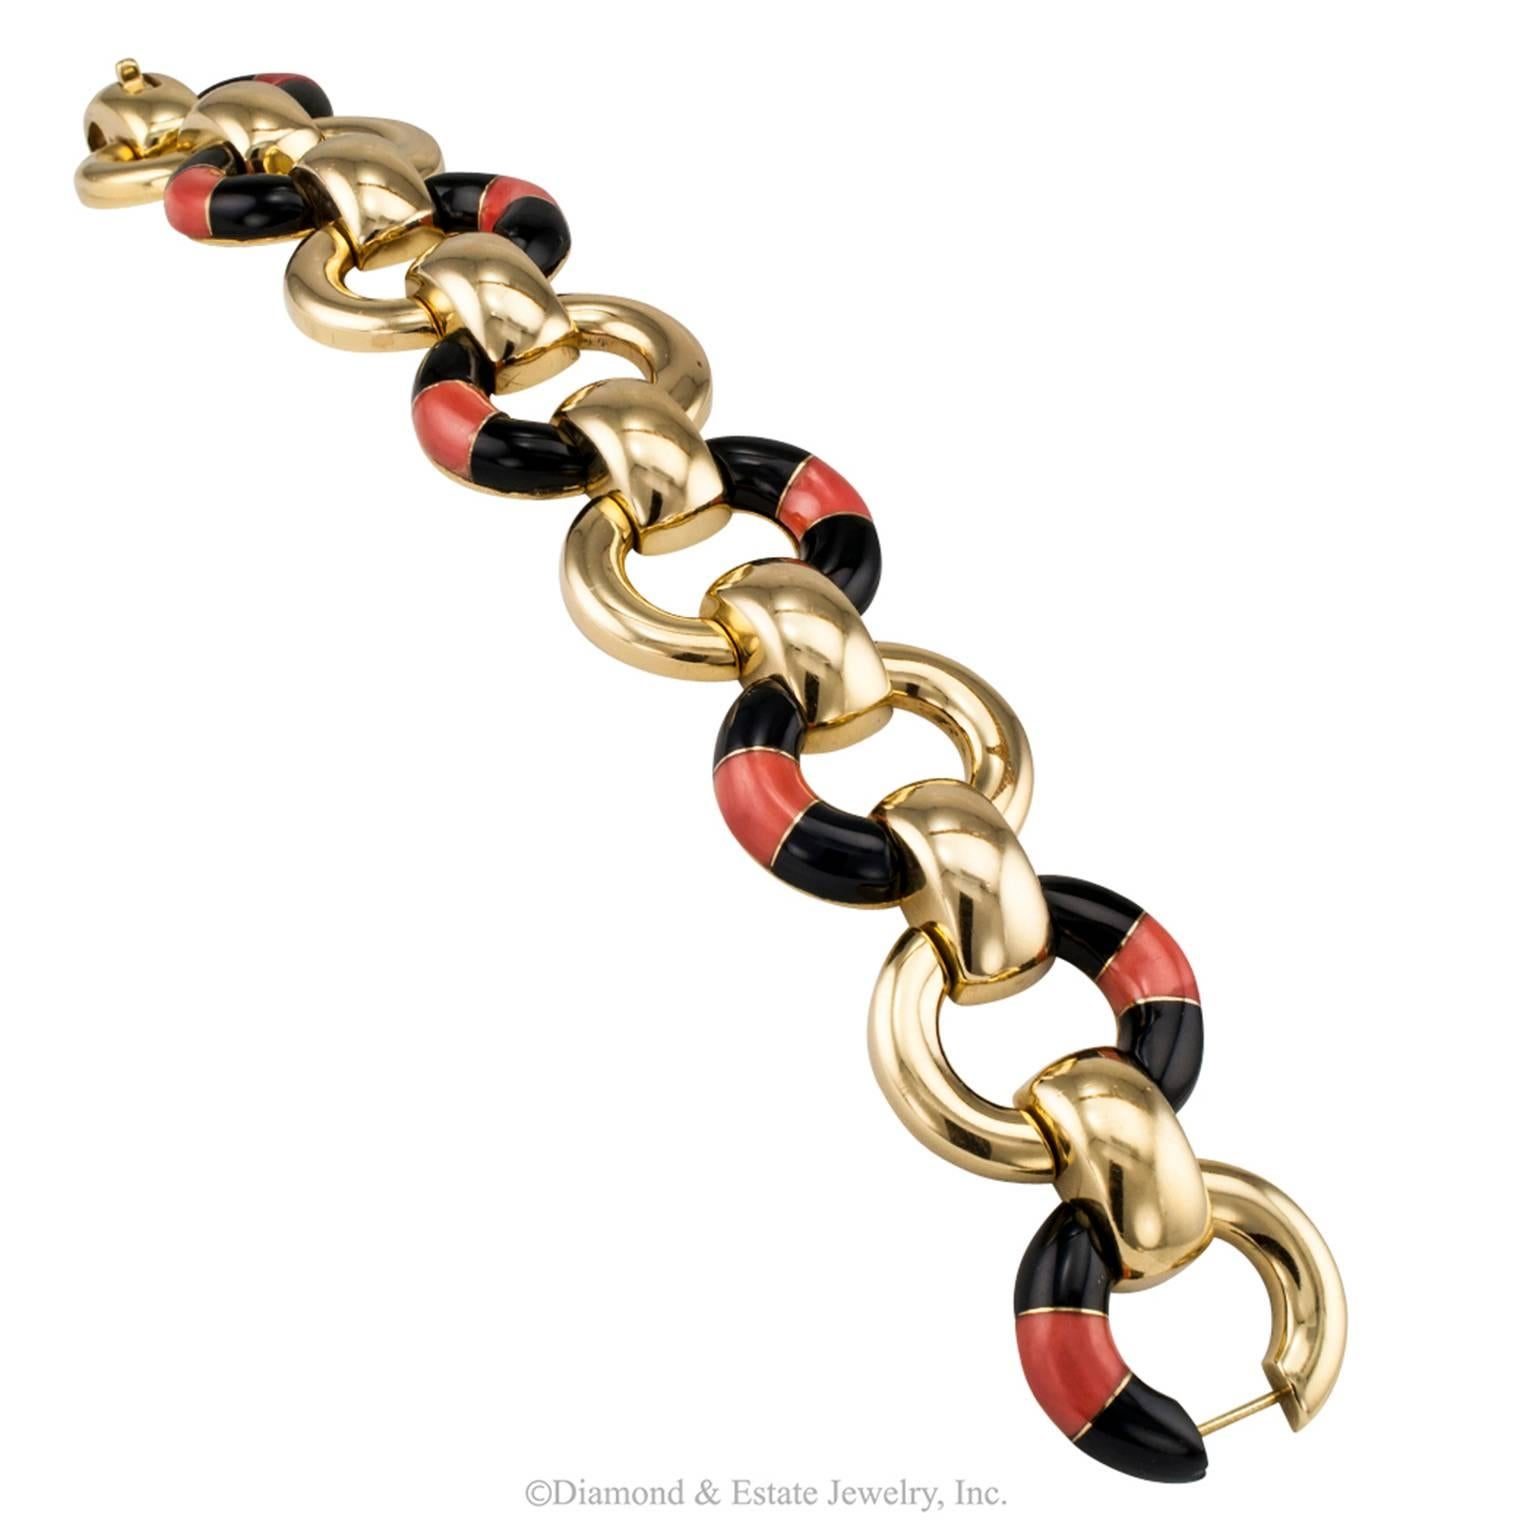 Coral Onyx Gold Link Bracelet

1970s Onyx and Coral link bracelet.  Seven oblong, open links, alternating a coral between black onyx motif that shapes into a visually striking pattern highlighted by brightly polished 18-karat gold.  The play of